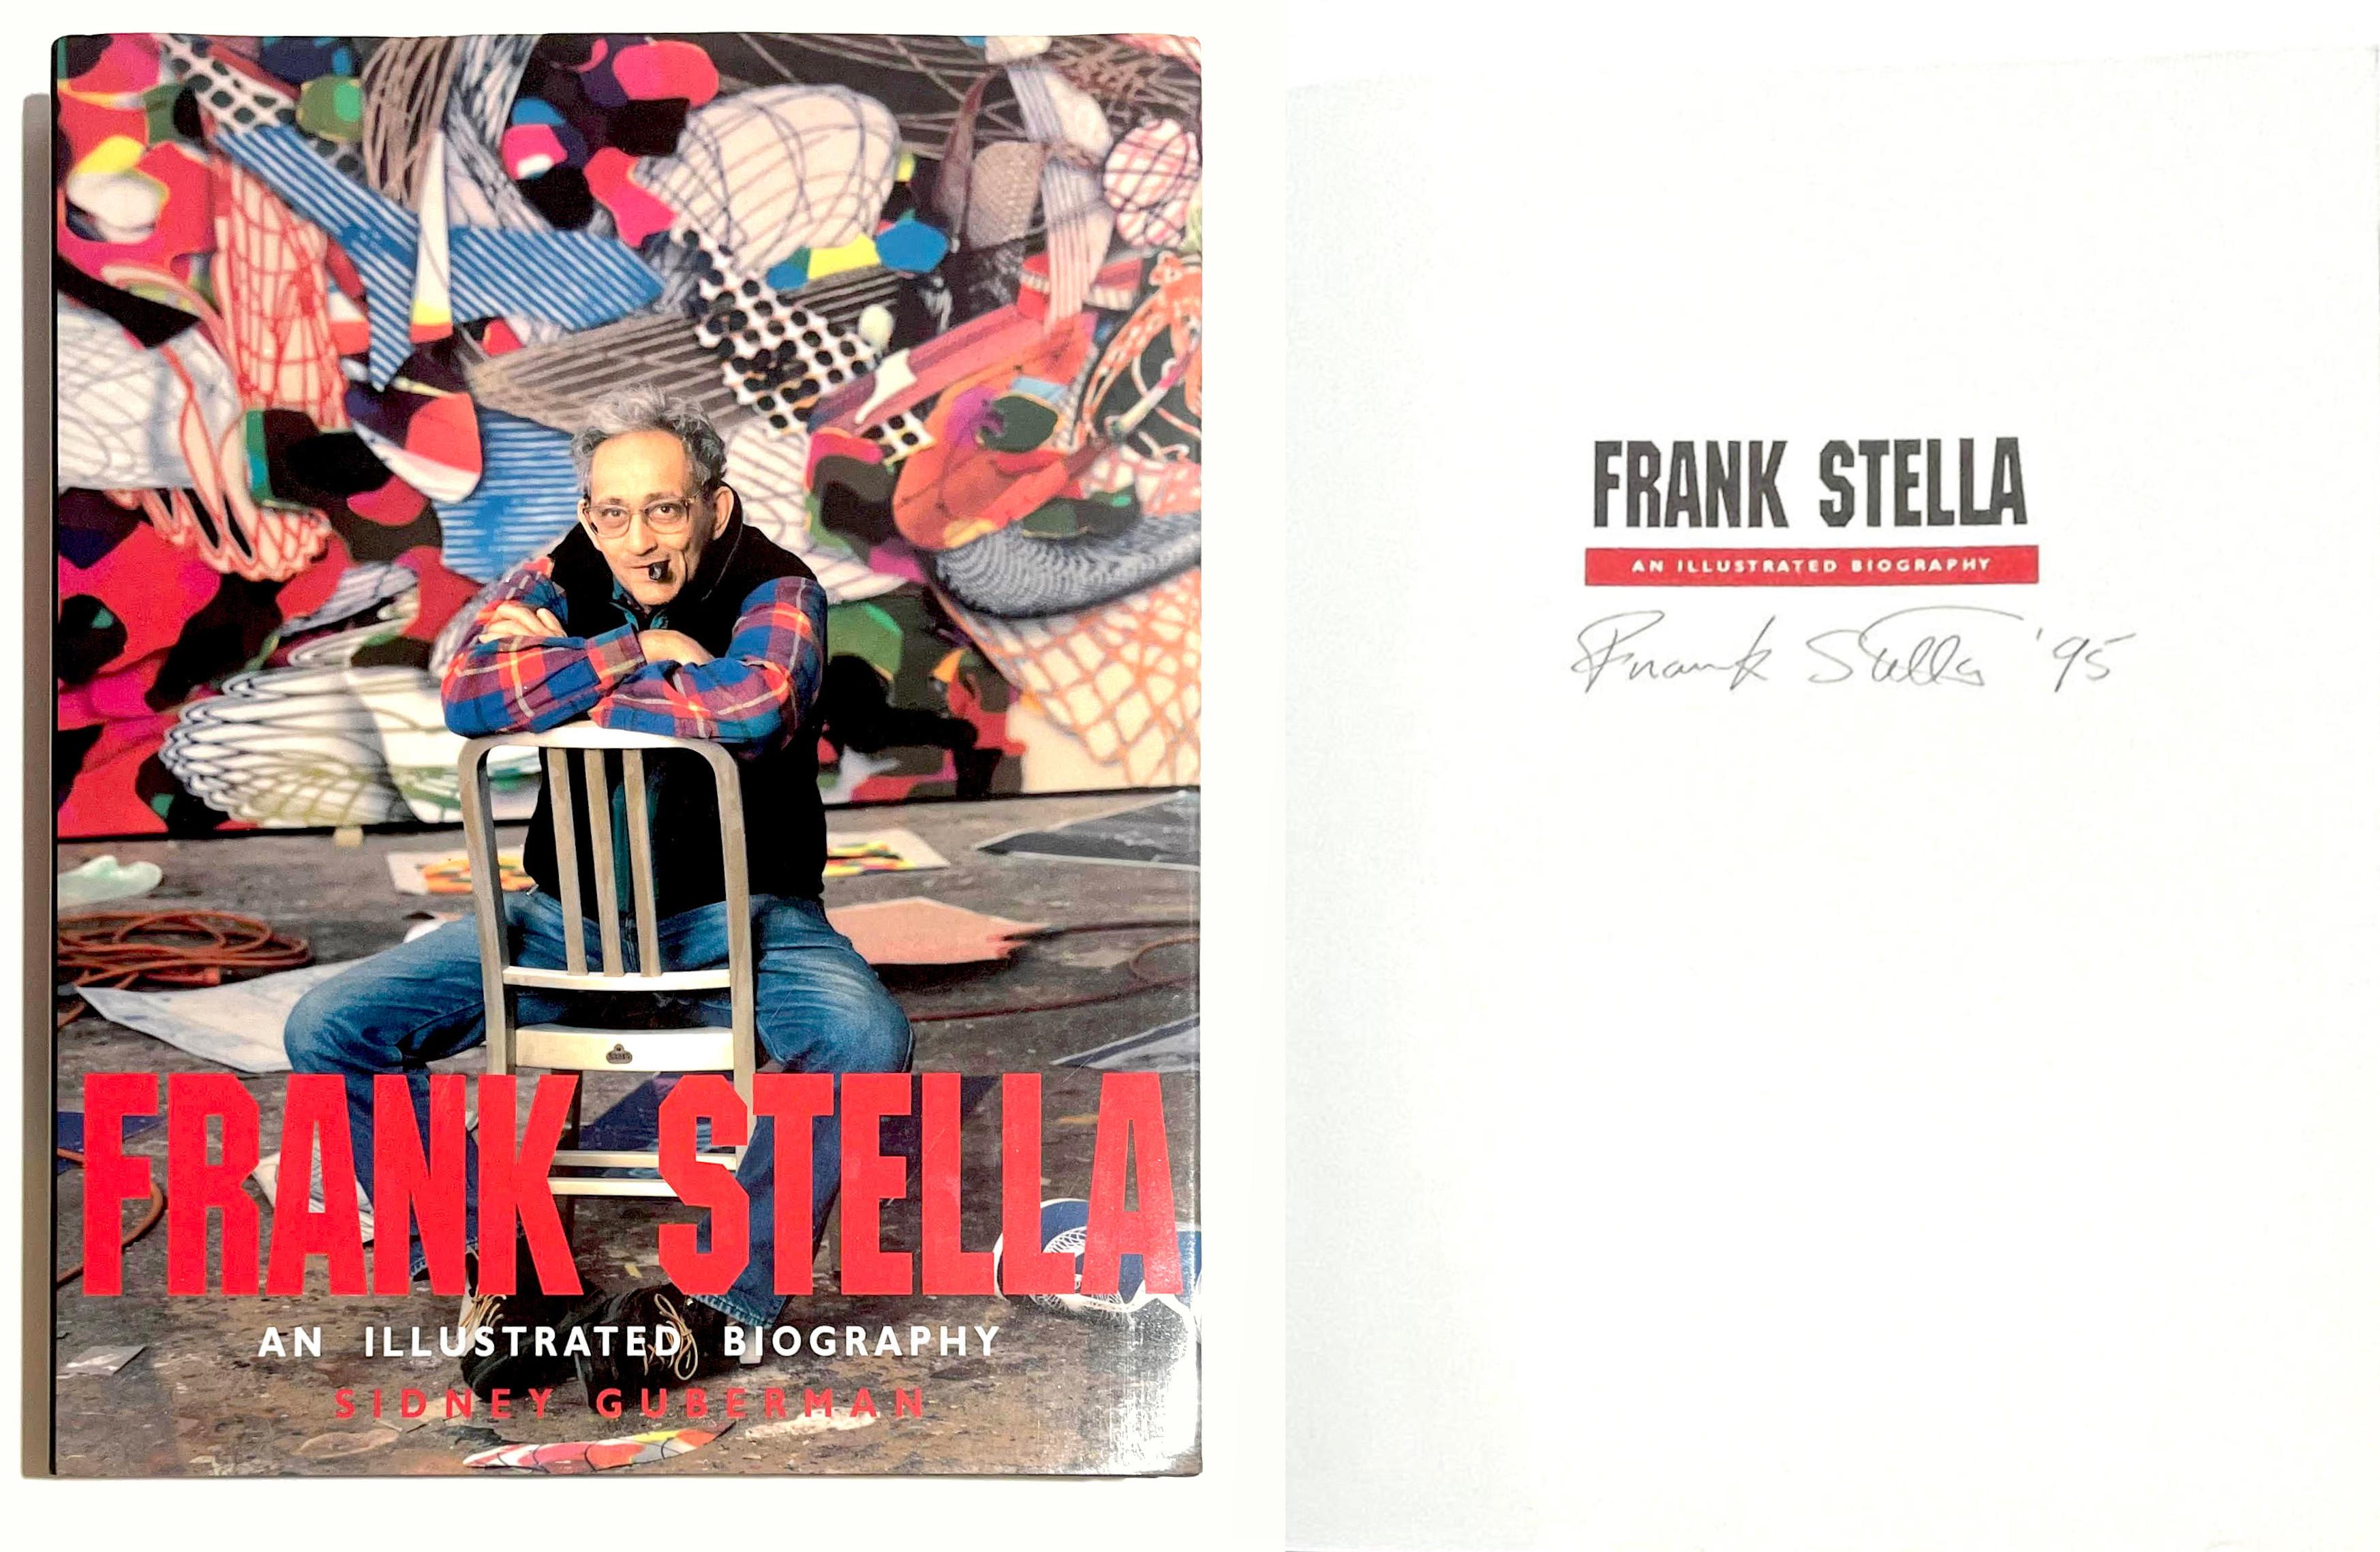 Frank Stella; An Illustrated Biography (Hand signed and dated by Frank Stella), 1995
Hardback monograph (hand signed and inscribed on the title page)
Hand signed and dated by Frank Stella on the title page
12 1/4 × 9 1/2 × 1 inches
Unframed
This